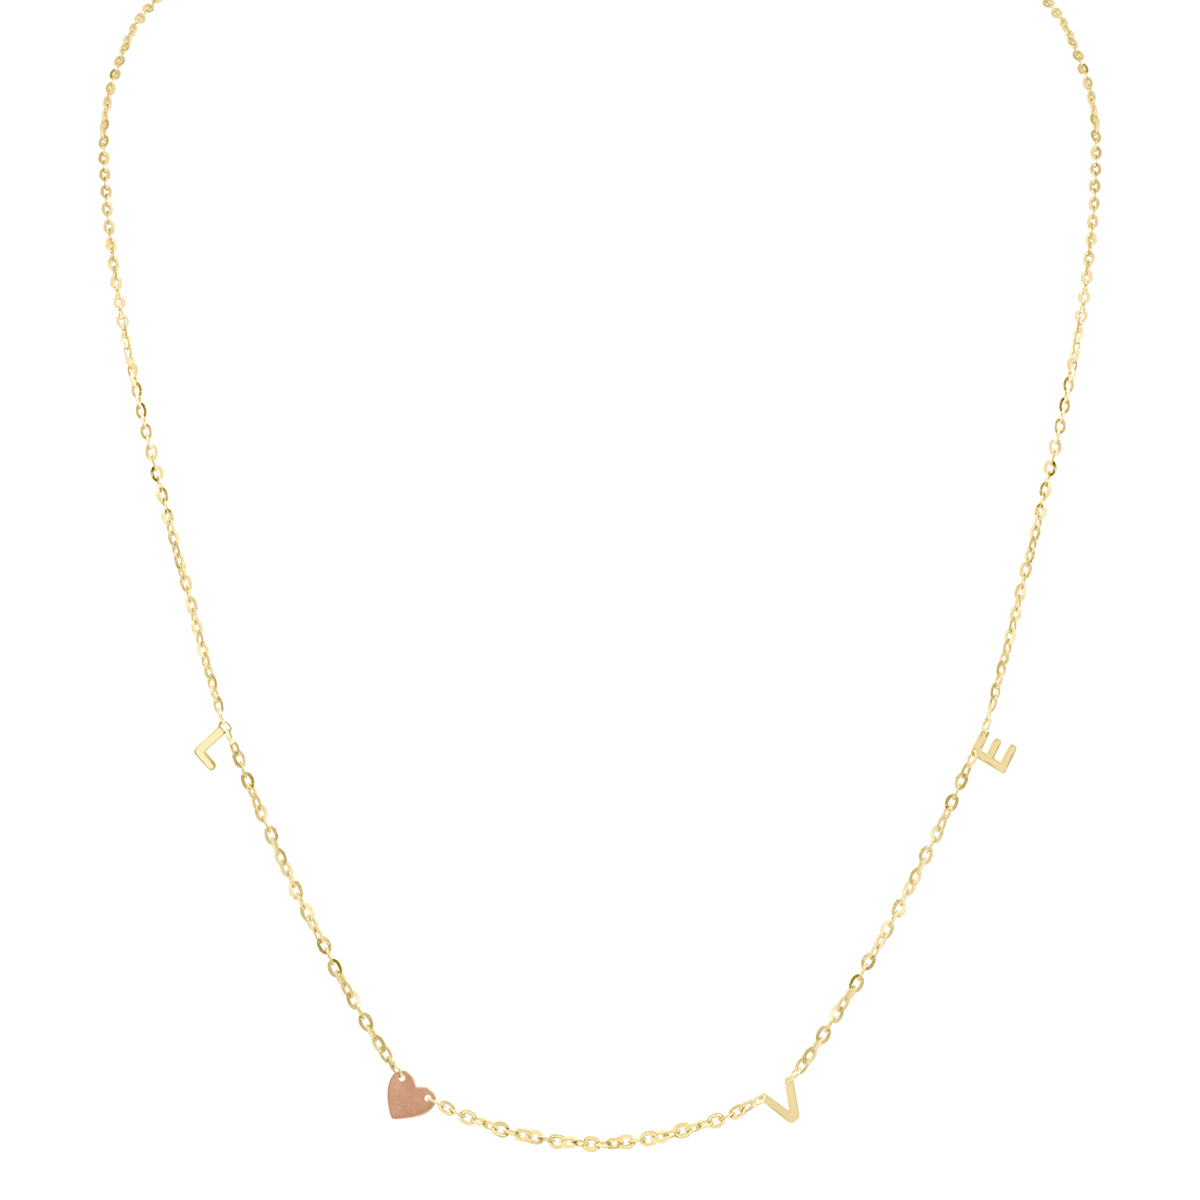 Image of 14K Solid Yellow and Rose Gold LOVE Necklace with Lobster Clasp